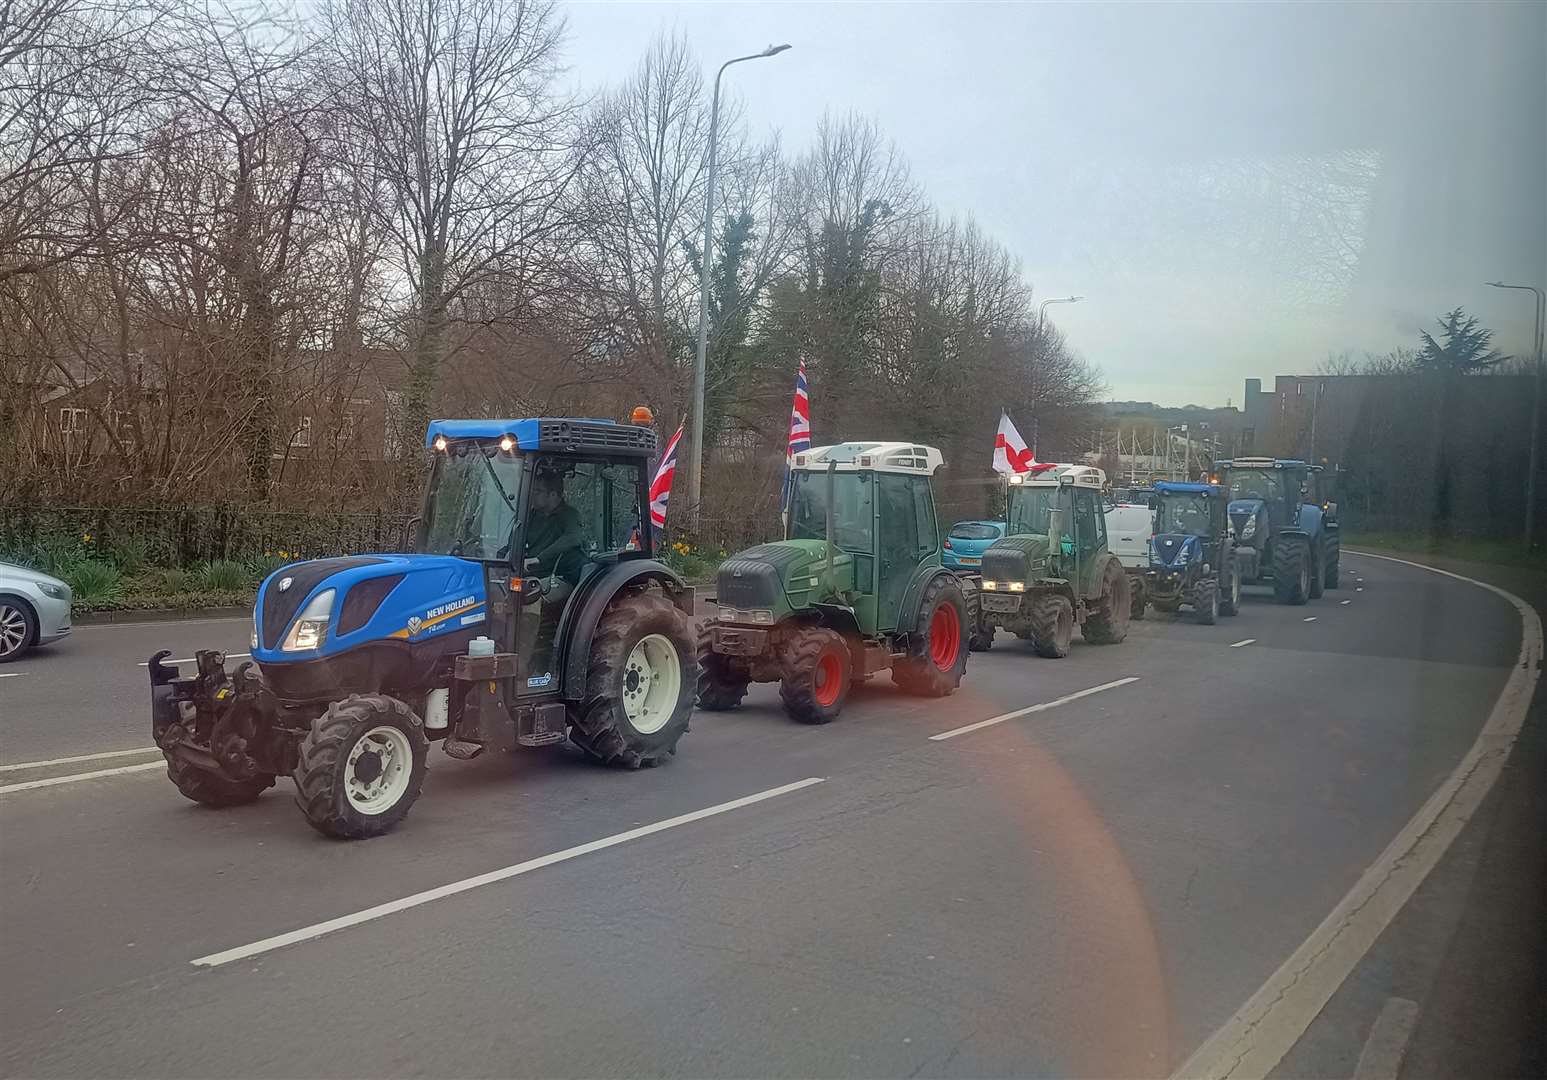 More than 25 tractors have lined the streets of Canterbury for a protest